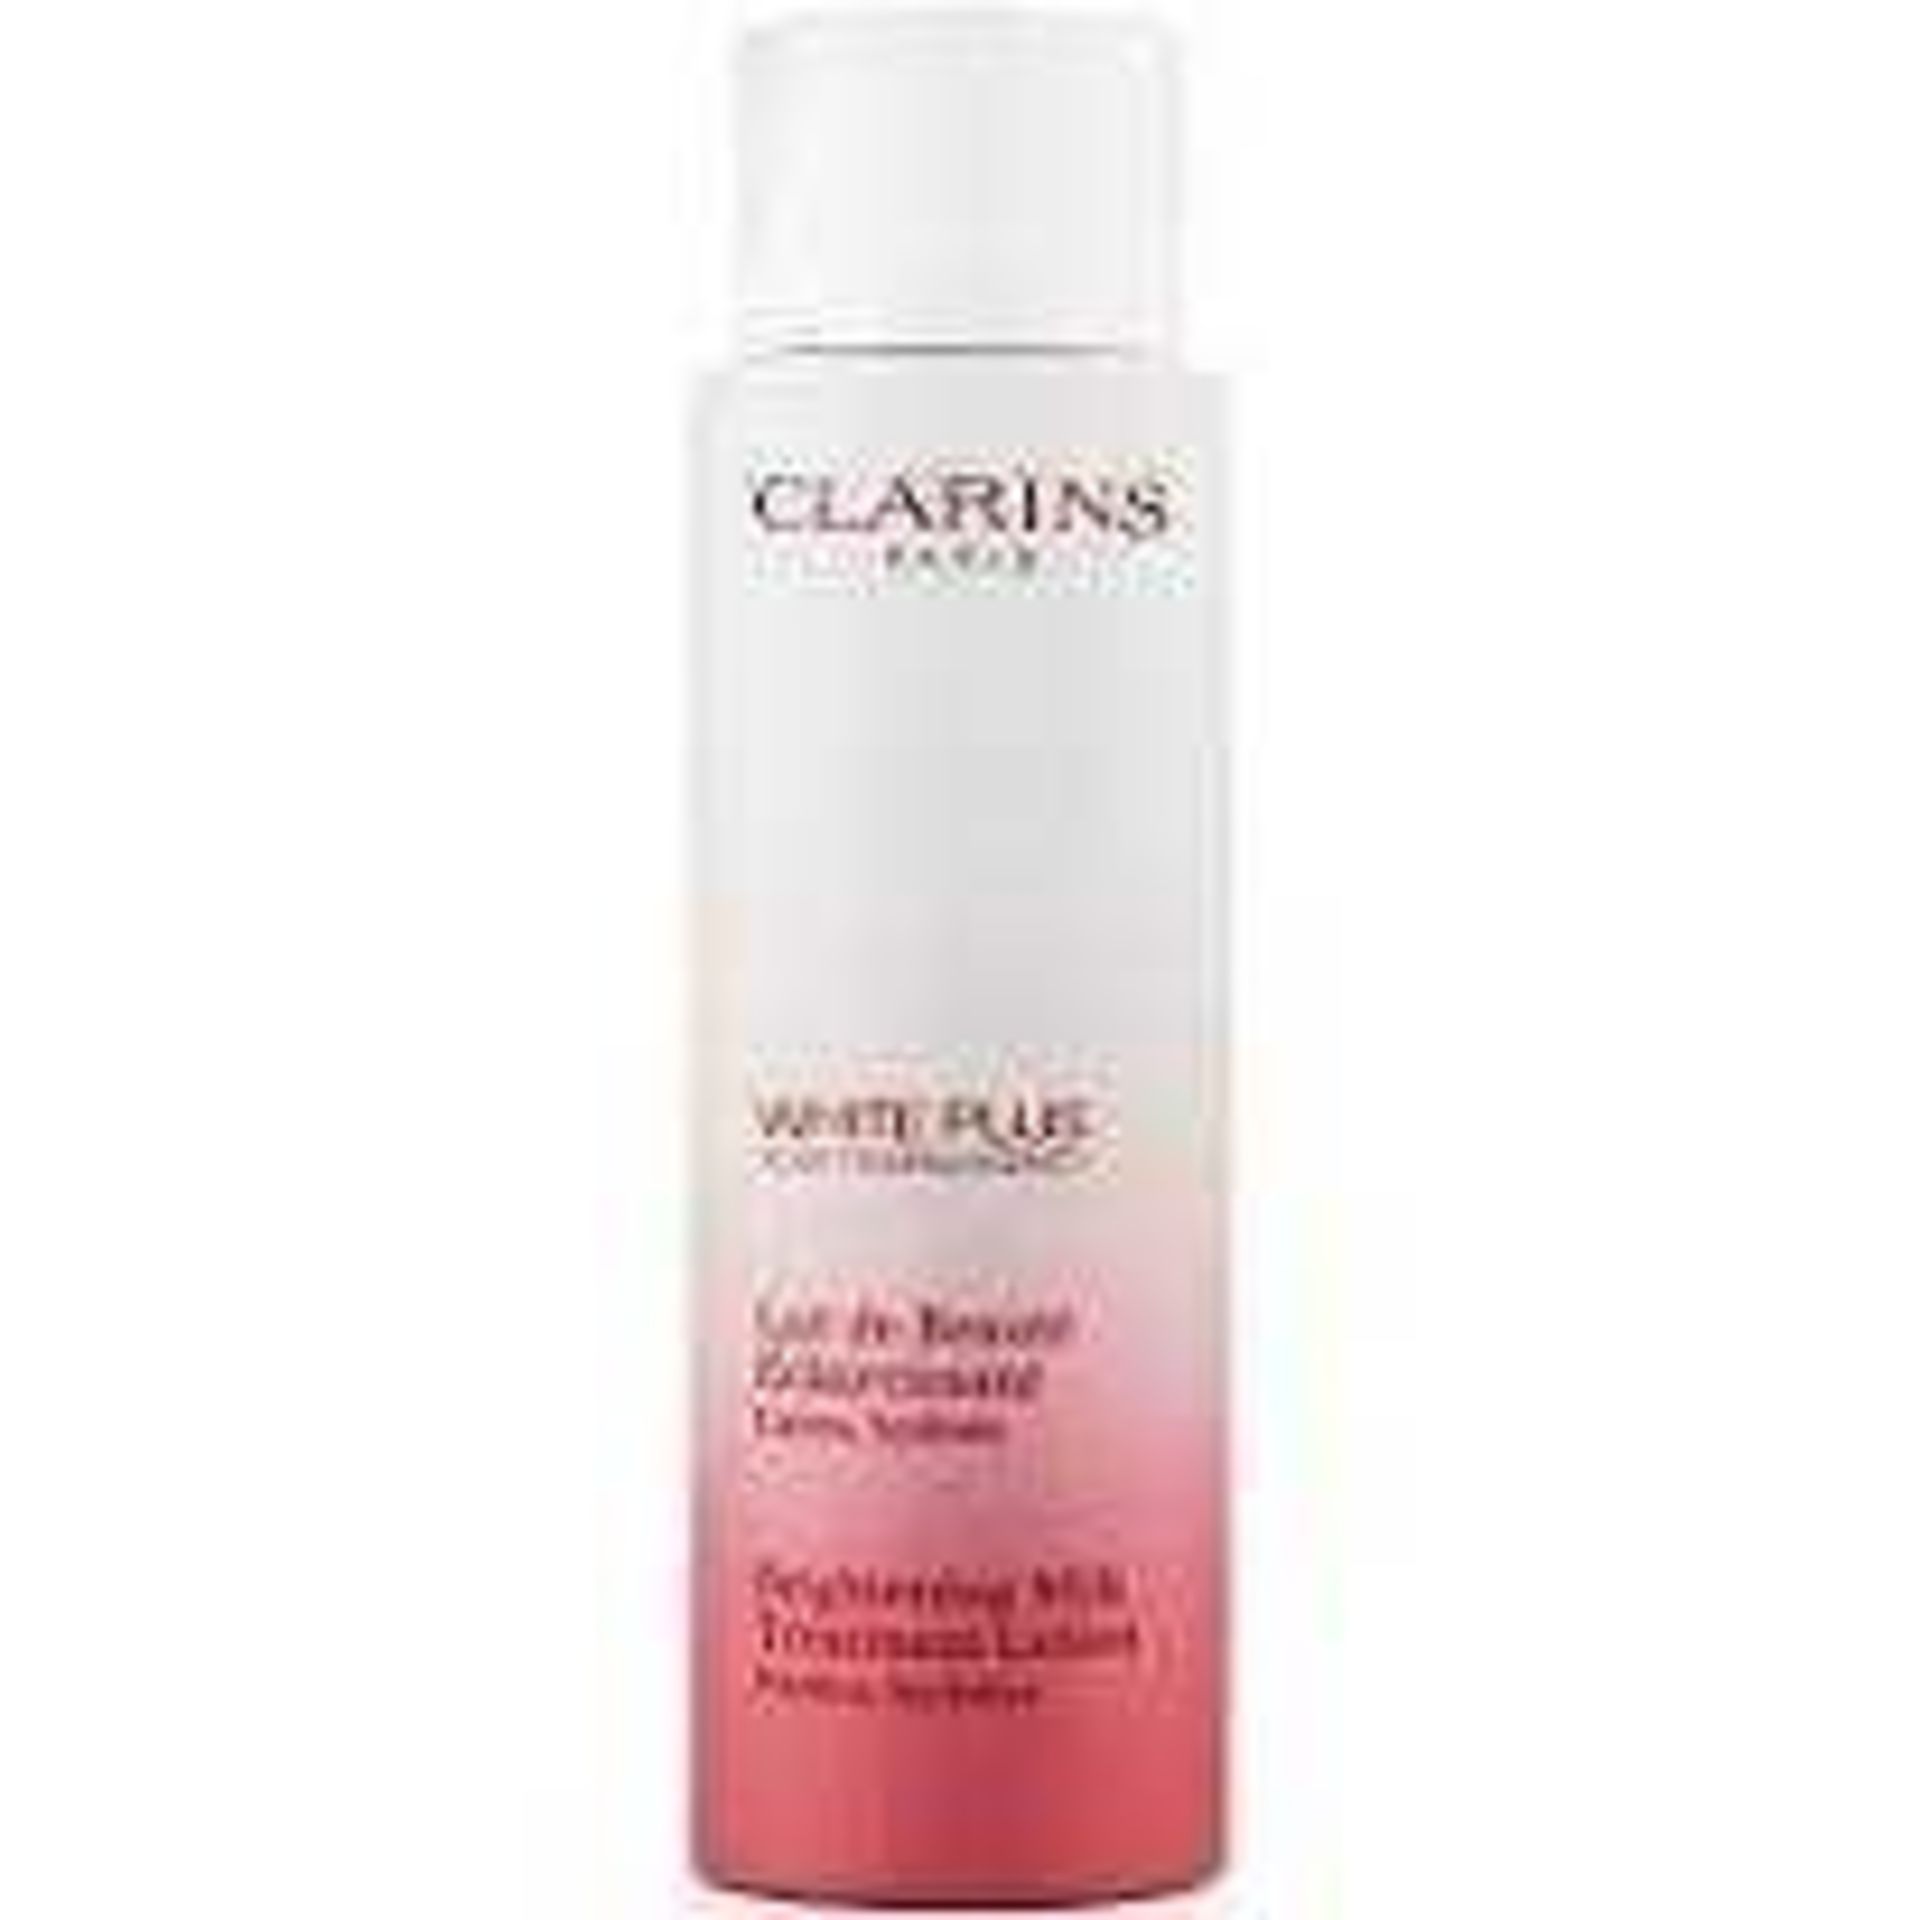 RRP £100 Combined Lot To Contain Used Tester Bottle 1X Clarins Brightening Aqua Treatment Lotion, 1X